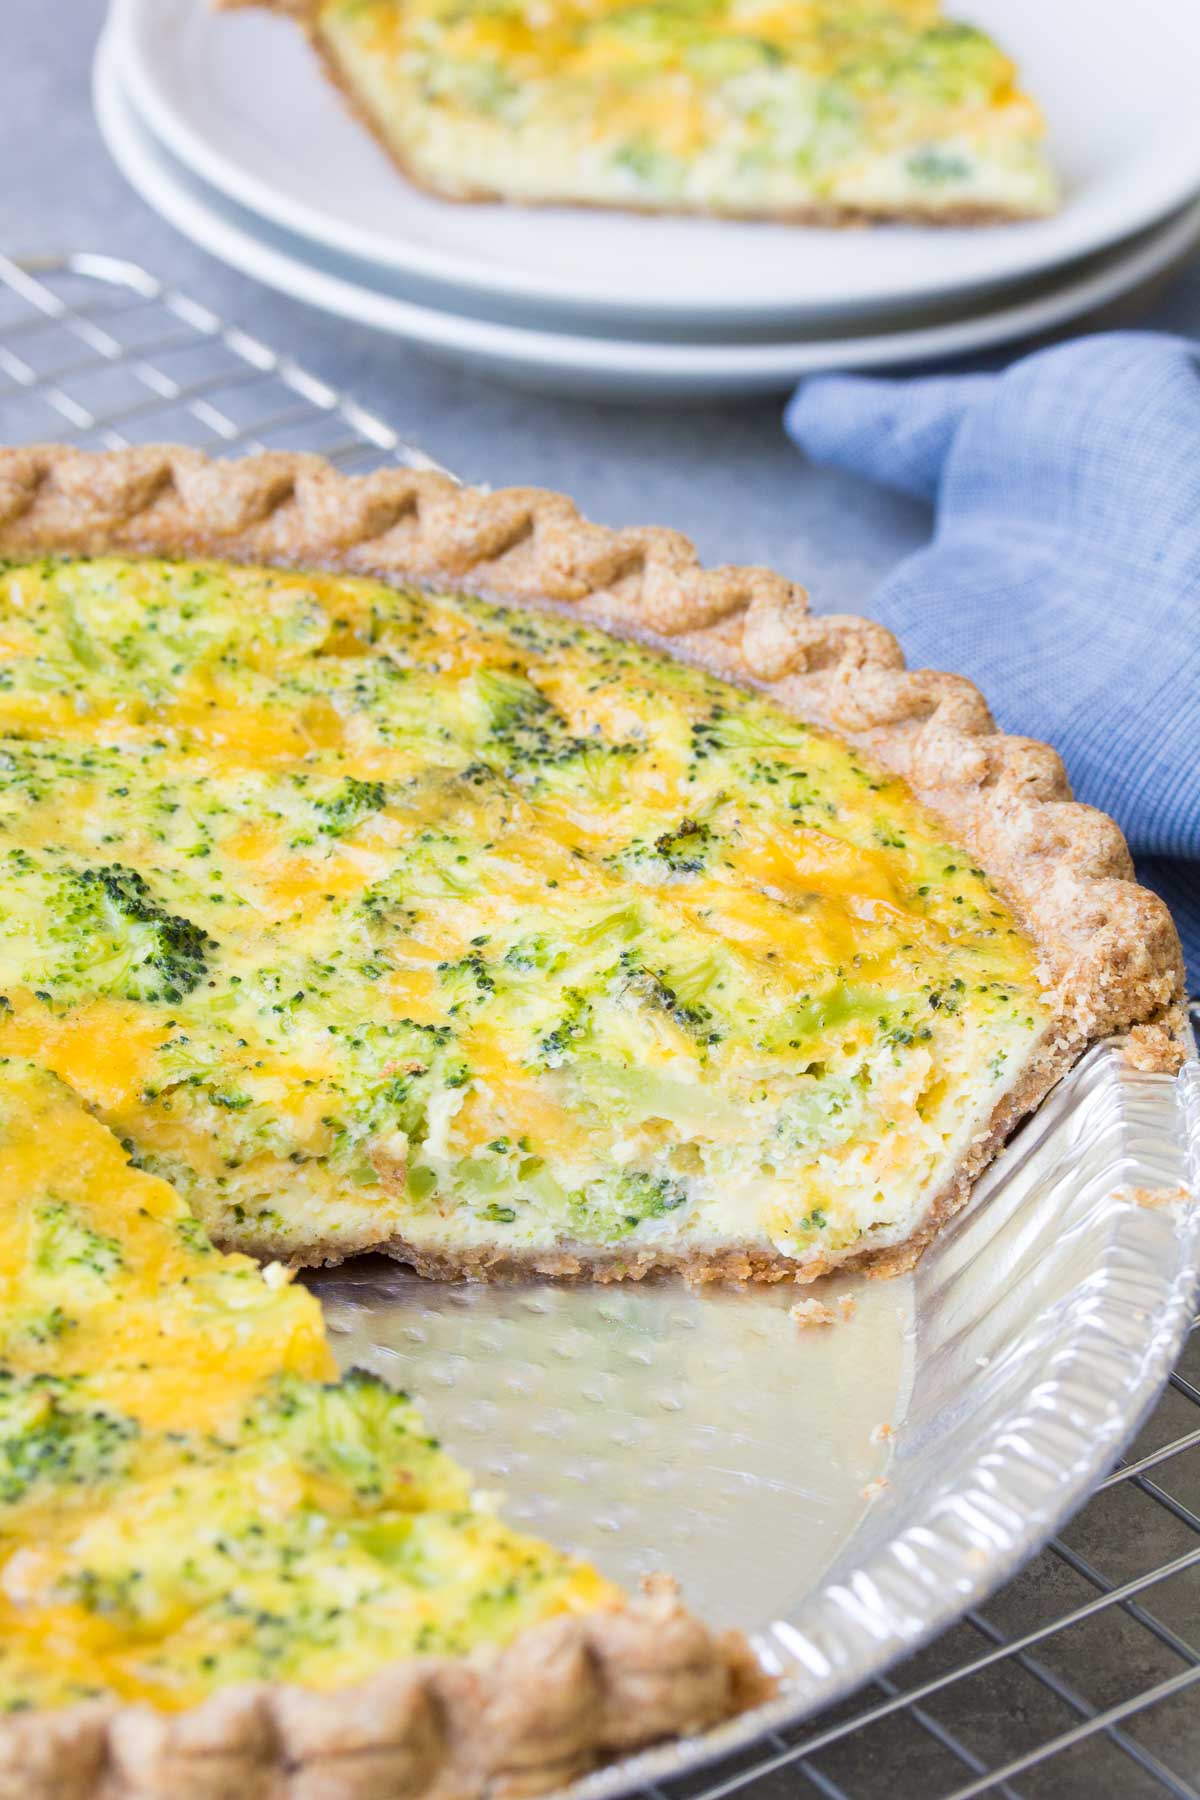 Easy Broccoli Cheese Quiche (5 Ingredients)